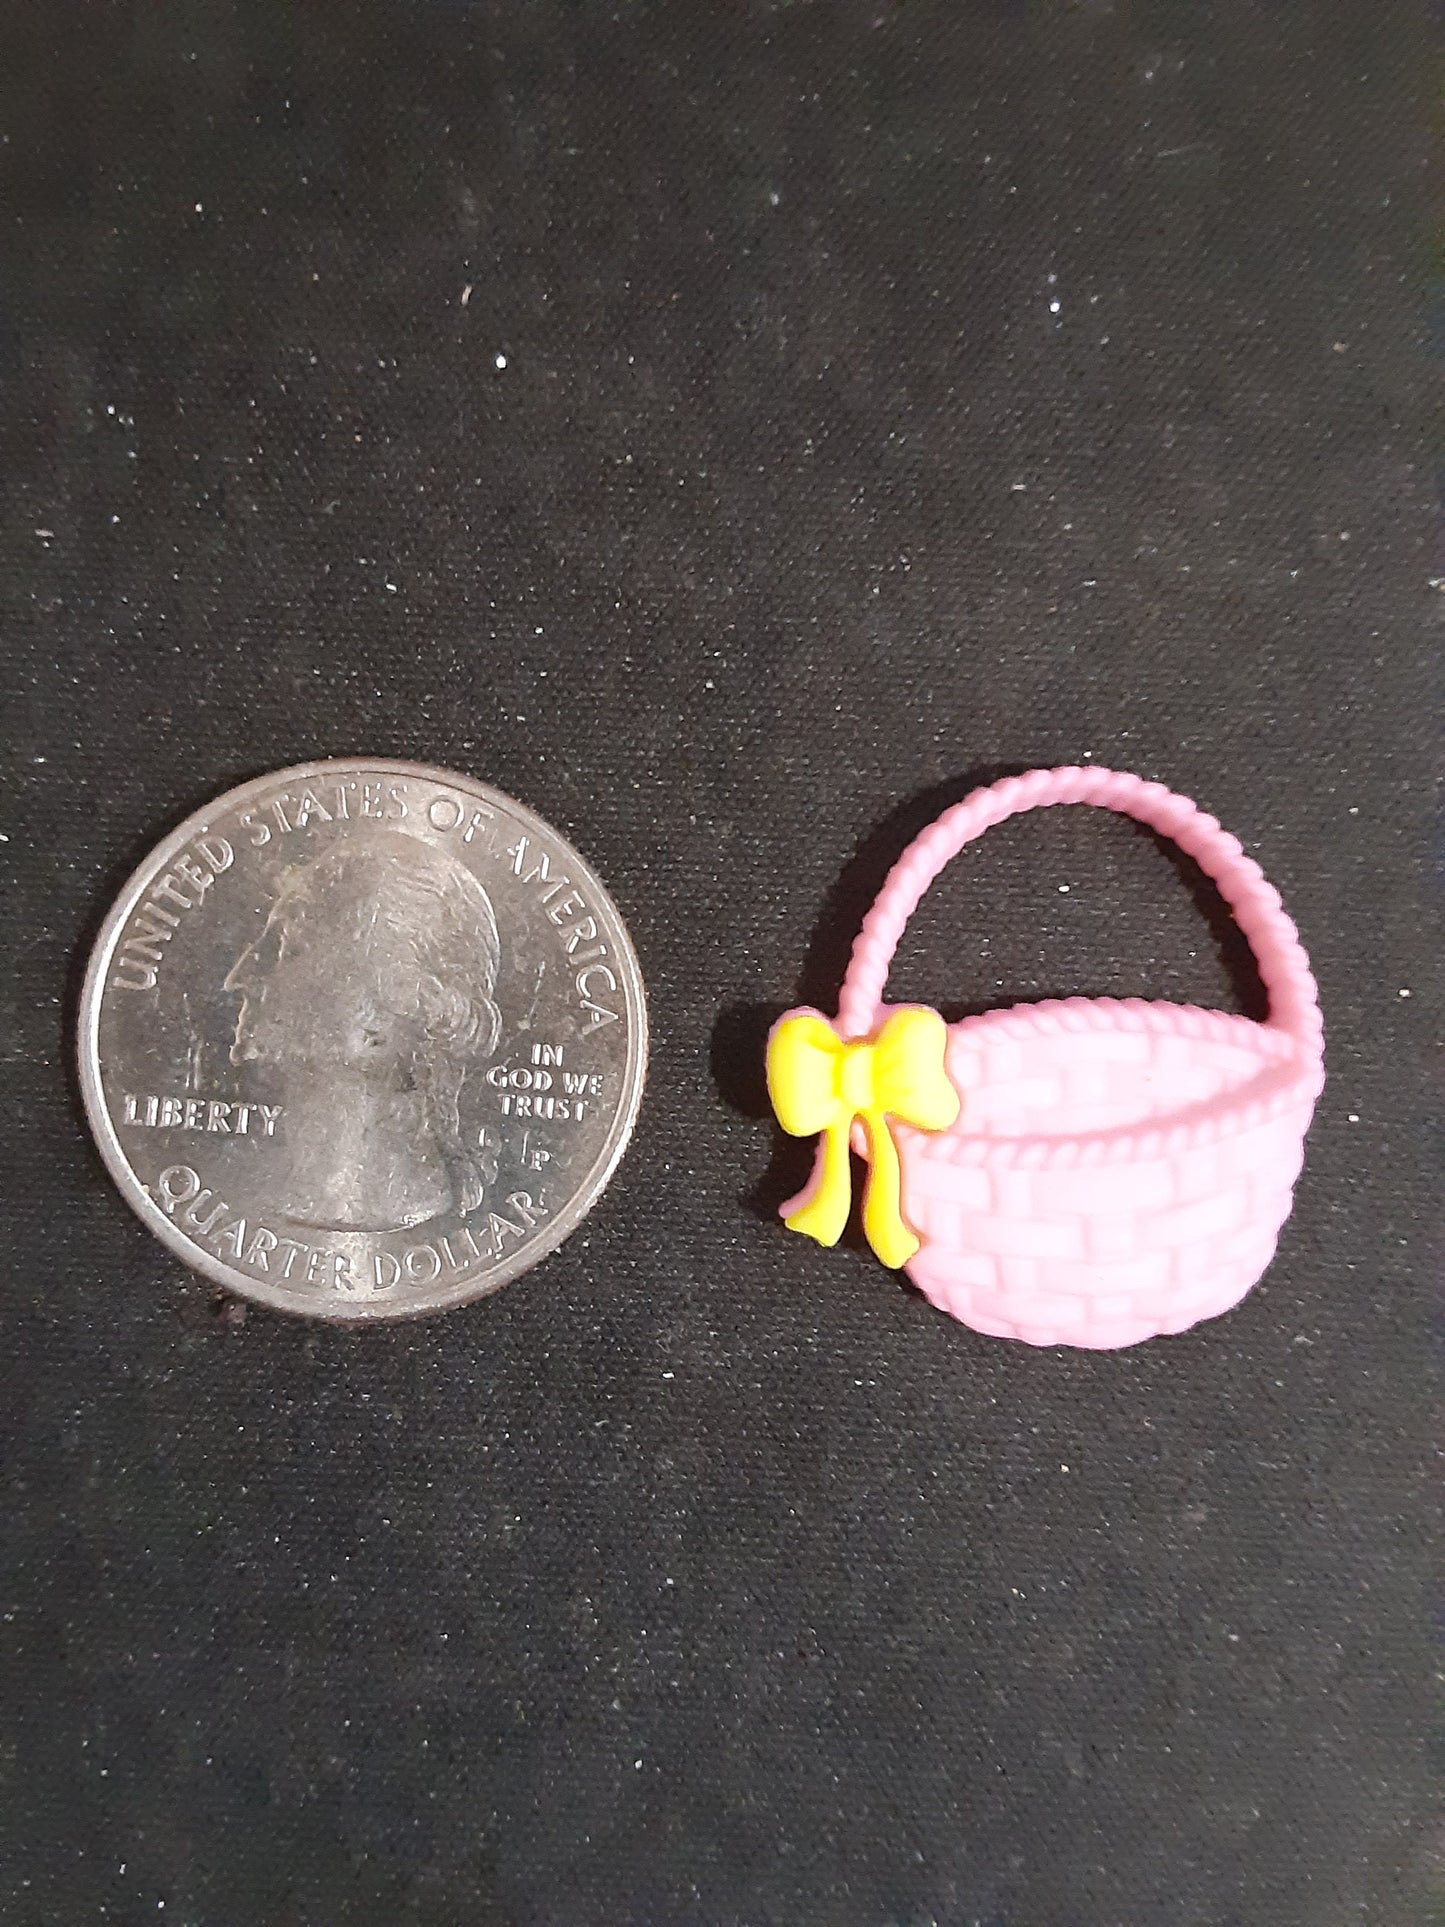 More Easter needle minders